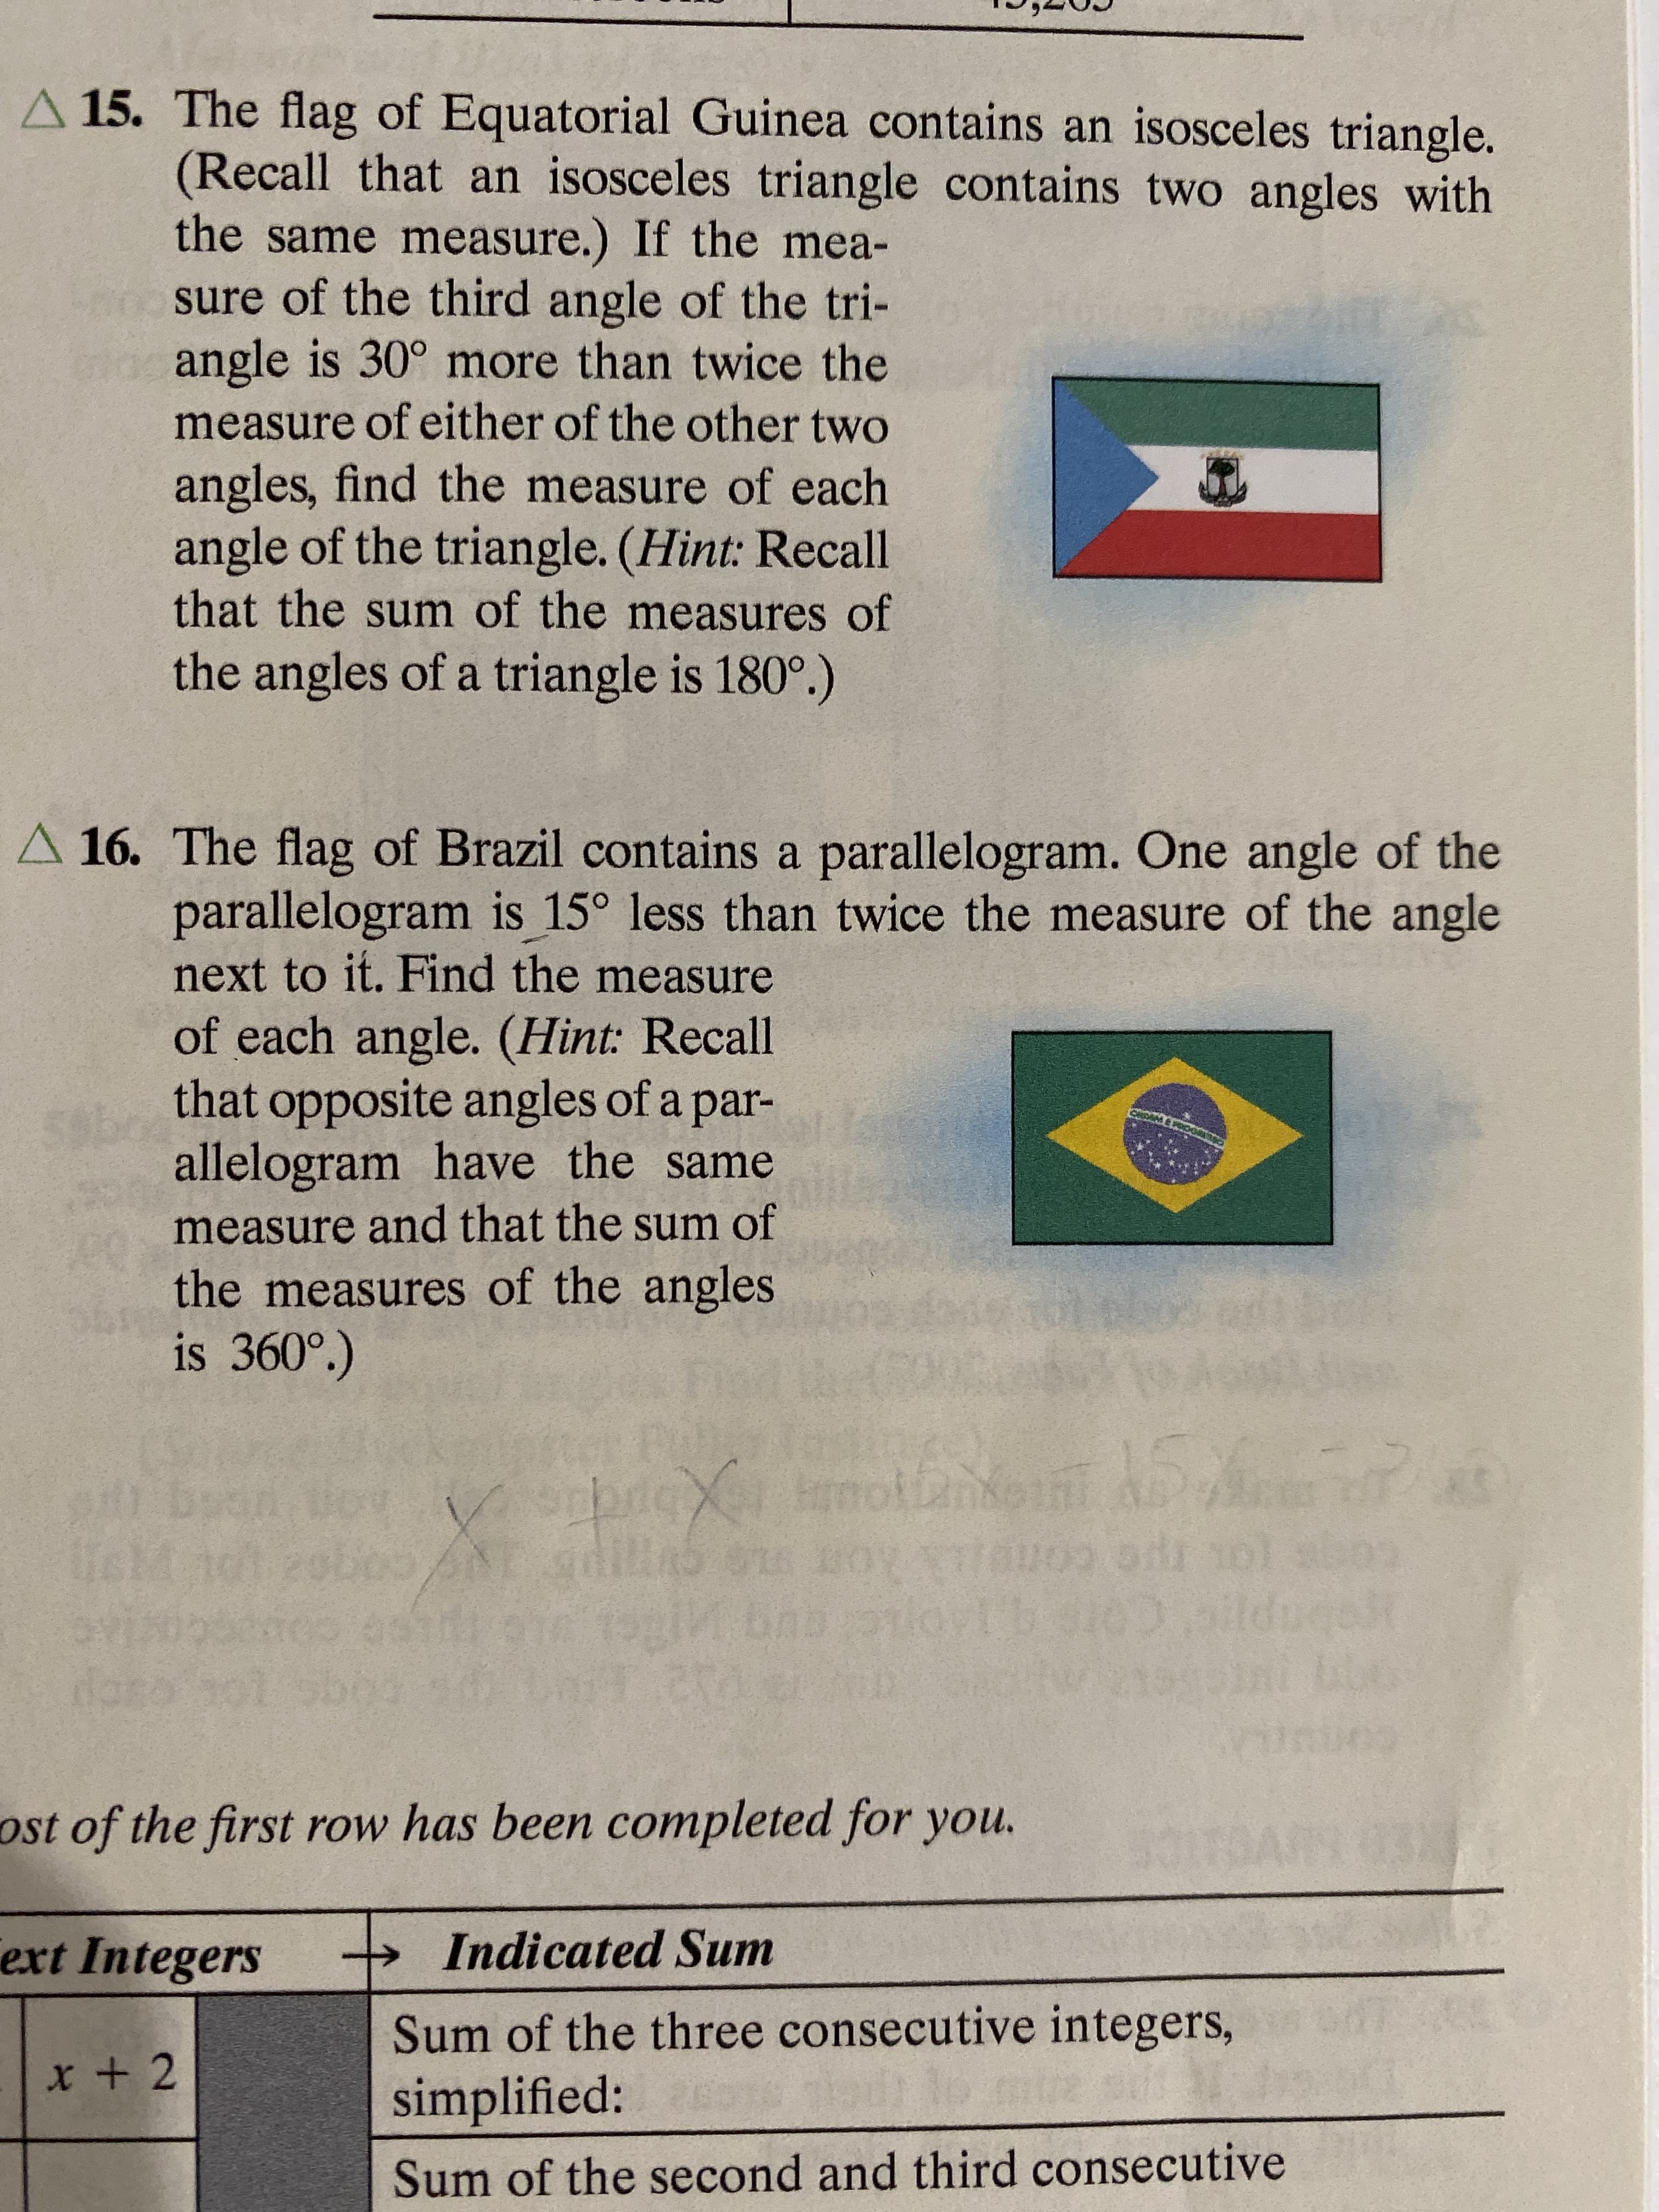 A 15. The flag of Equatorial Guinea contains an isosceles triangle.
(Recall that an isosceles triangle contains two angles with
the same measure.) If the mea-
sure of the third angle of the tri-
angle is 30° more than twice the
measure of either of the other two
angles, find the measure of each
angle of the triangle. (Hint: Recall
that the sum of the measures of
the angles of a triangle is 180.)
A 16. The flag of Brazil contains a parallelogram. One angle of the
parallelogram is 15° less than twice the measure of the angle
next to it. Find the measure
of each angle. (Hint: Recall
that opposite angles of a par-
allelogram have the same
measure and that the sum of
the measures of the angles
is 360°)
15
rnol
2.s
X
5oun
s1 29b
brcx
on e
VLOAD SH 0I
दचच
dar
002
ost of the first row has been completed for you.
Indicated Sum
ext Integers
Sum of the three consecutive integers,
x + 2
simplified:
Sum of the second and third consecutive
